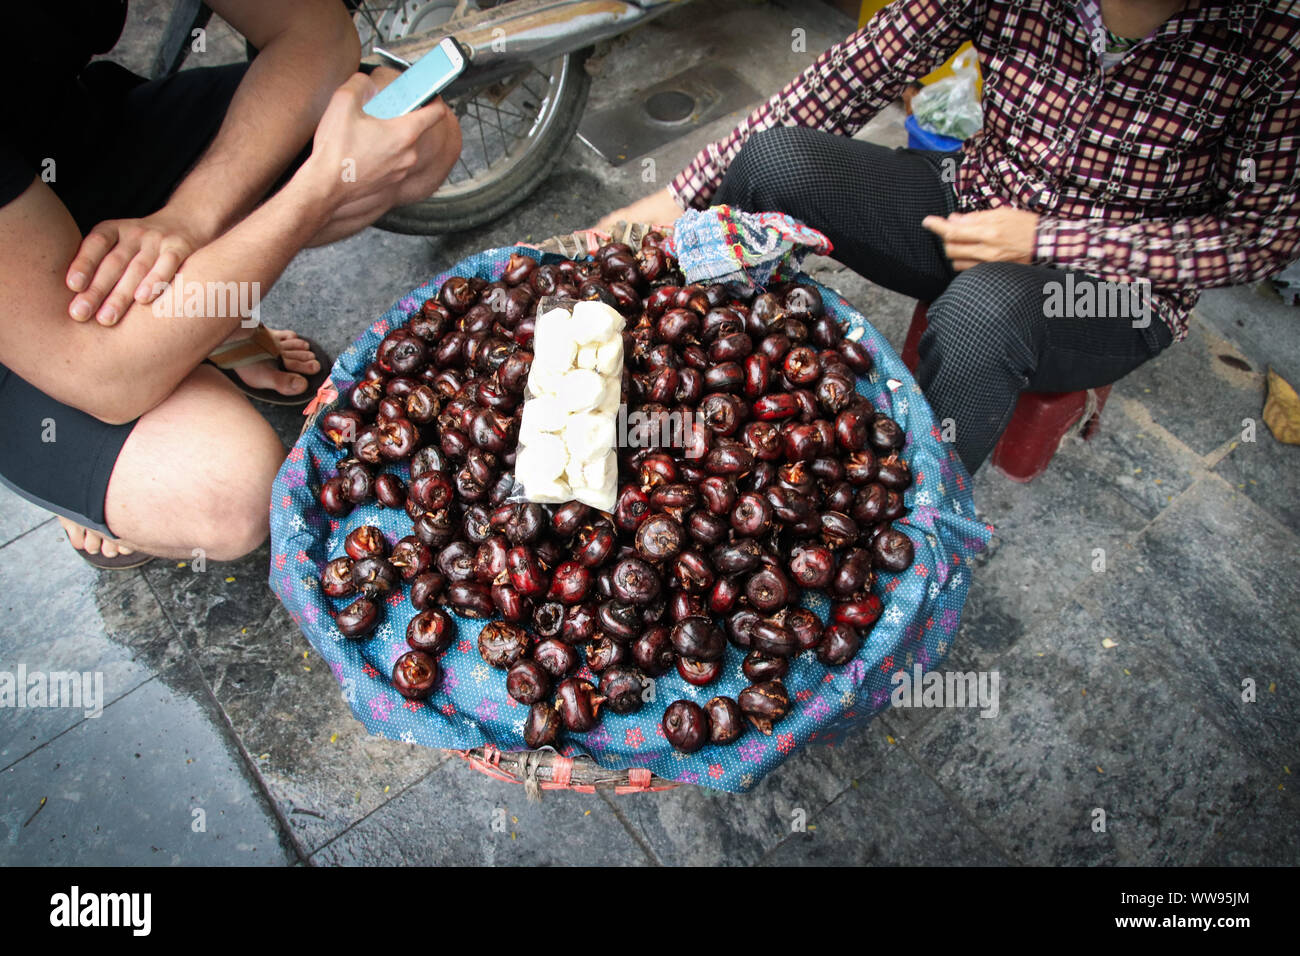 Overhead view of a tourist buying water chestnuts or eleocharis dulcis from a Vietnamese streetfood vendor Stock Photo